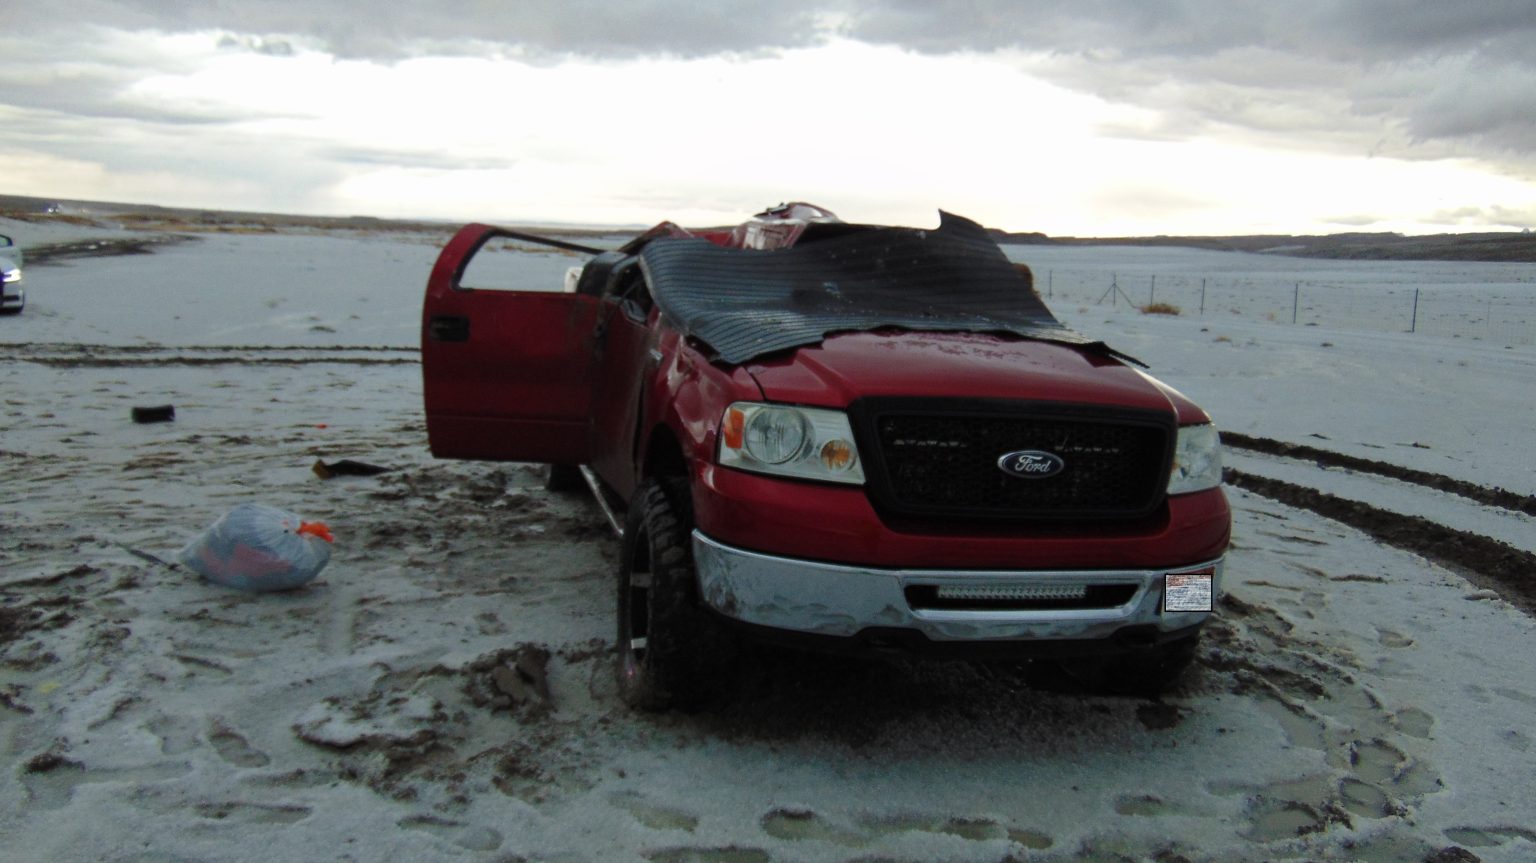 the truck that rolled and killed a 6-year-old in an emery county car crash...